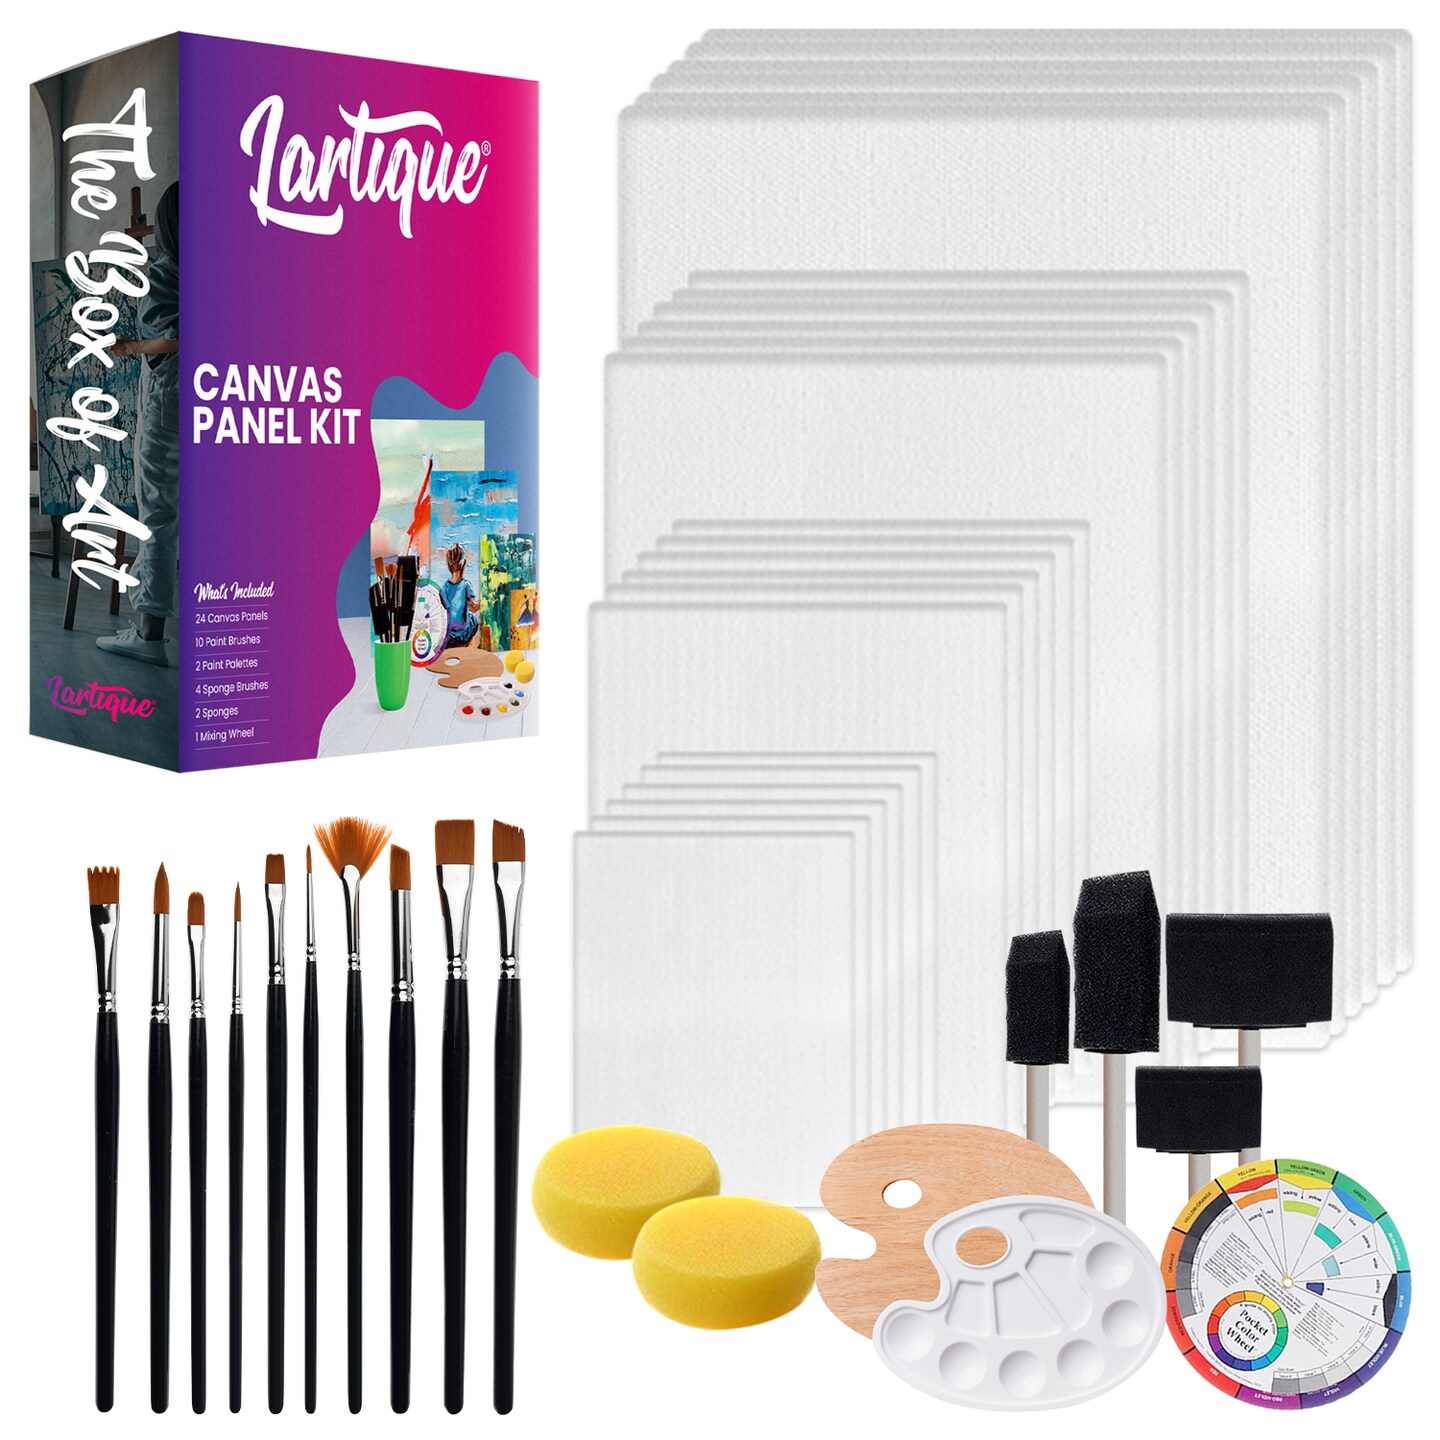 Lartique Canvases for Painting &#x2013; 43 Piece Painting Canvas, Painting Supplies, Paint Kit &#x2013; Painting Kit Includes Canvas Boards for Painting - Works with Acrylic, Oil, Pastel and Watercolor Paint